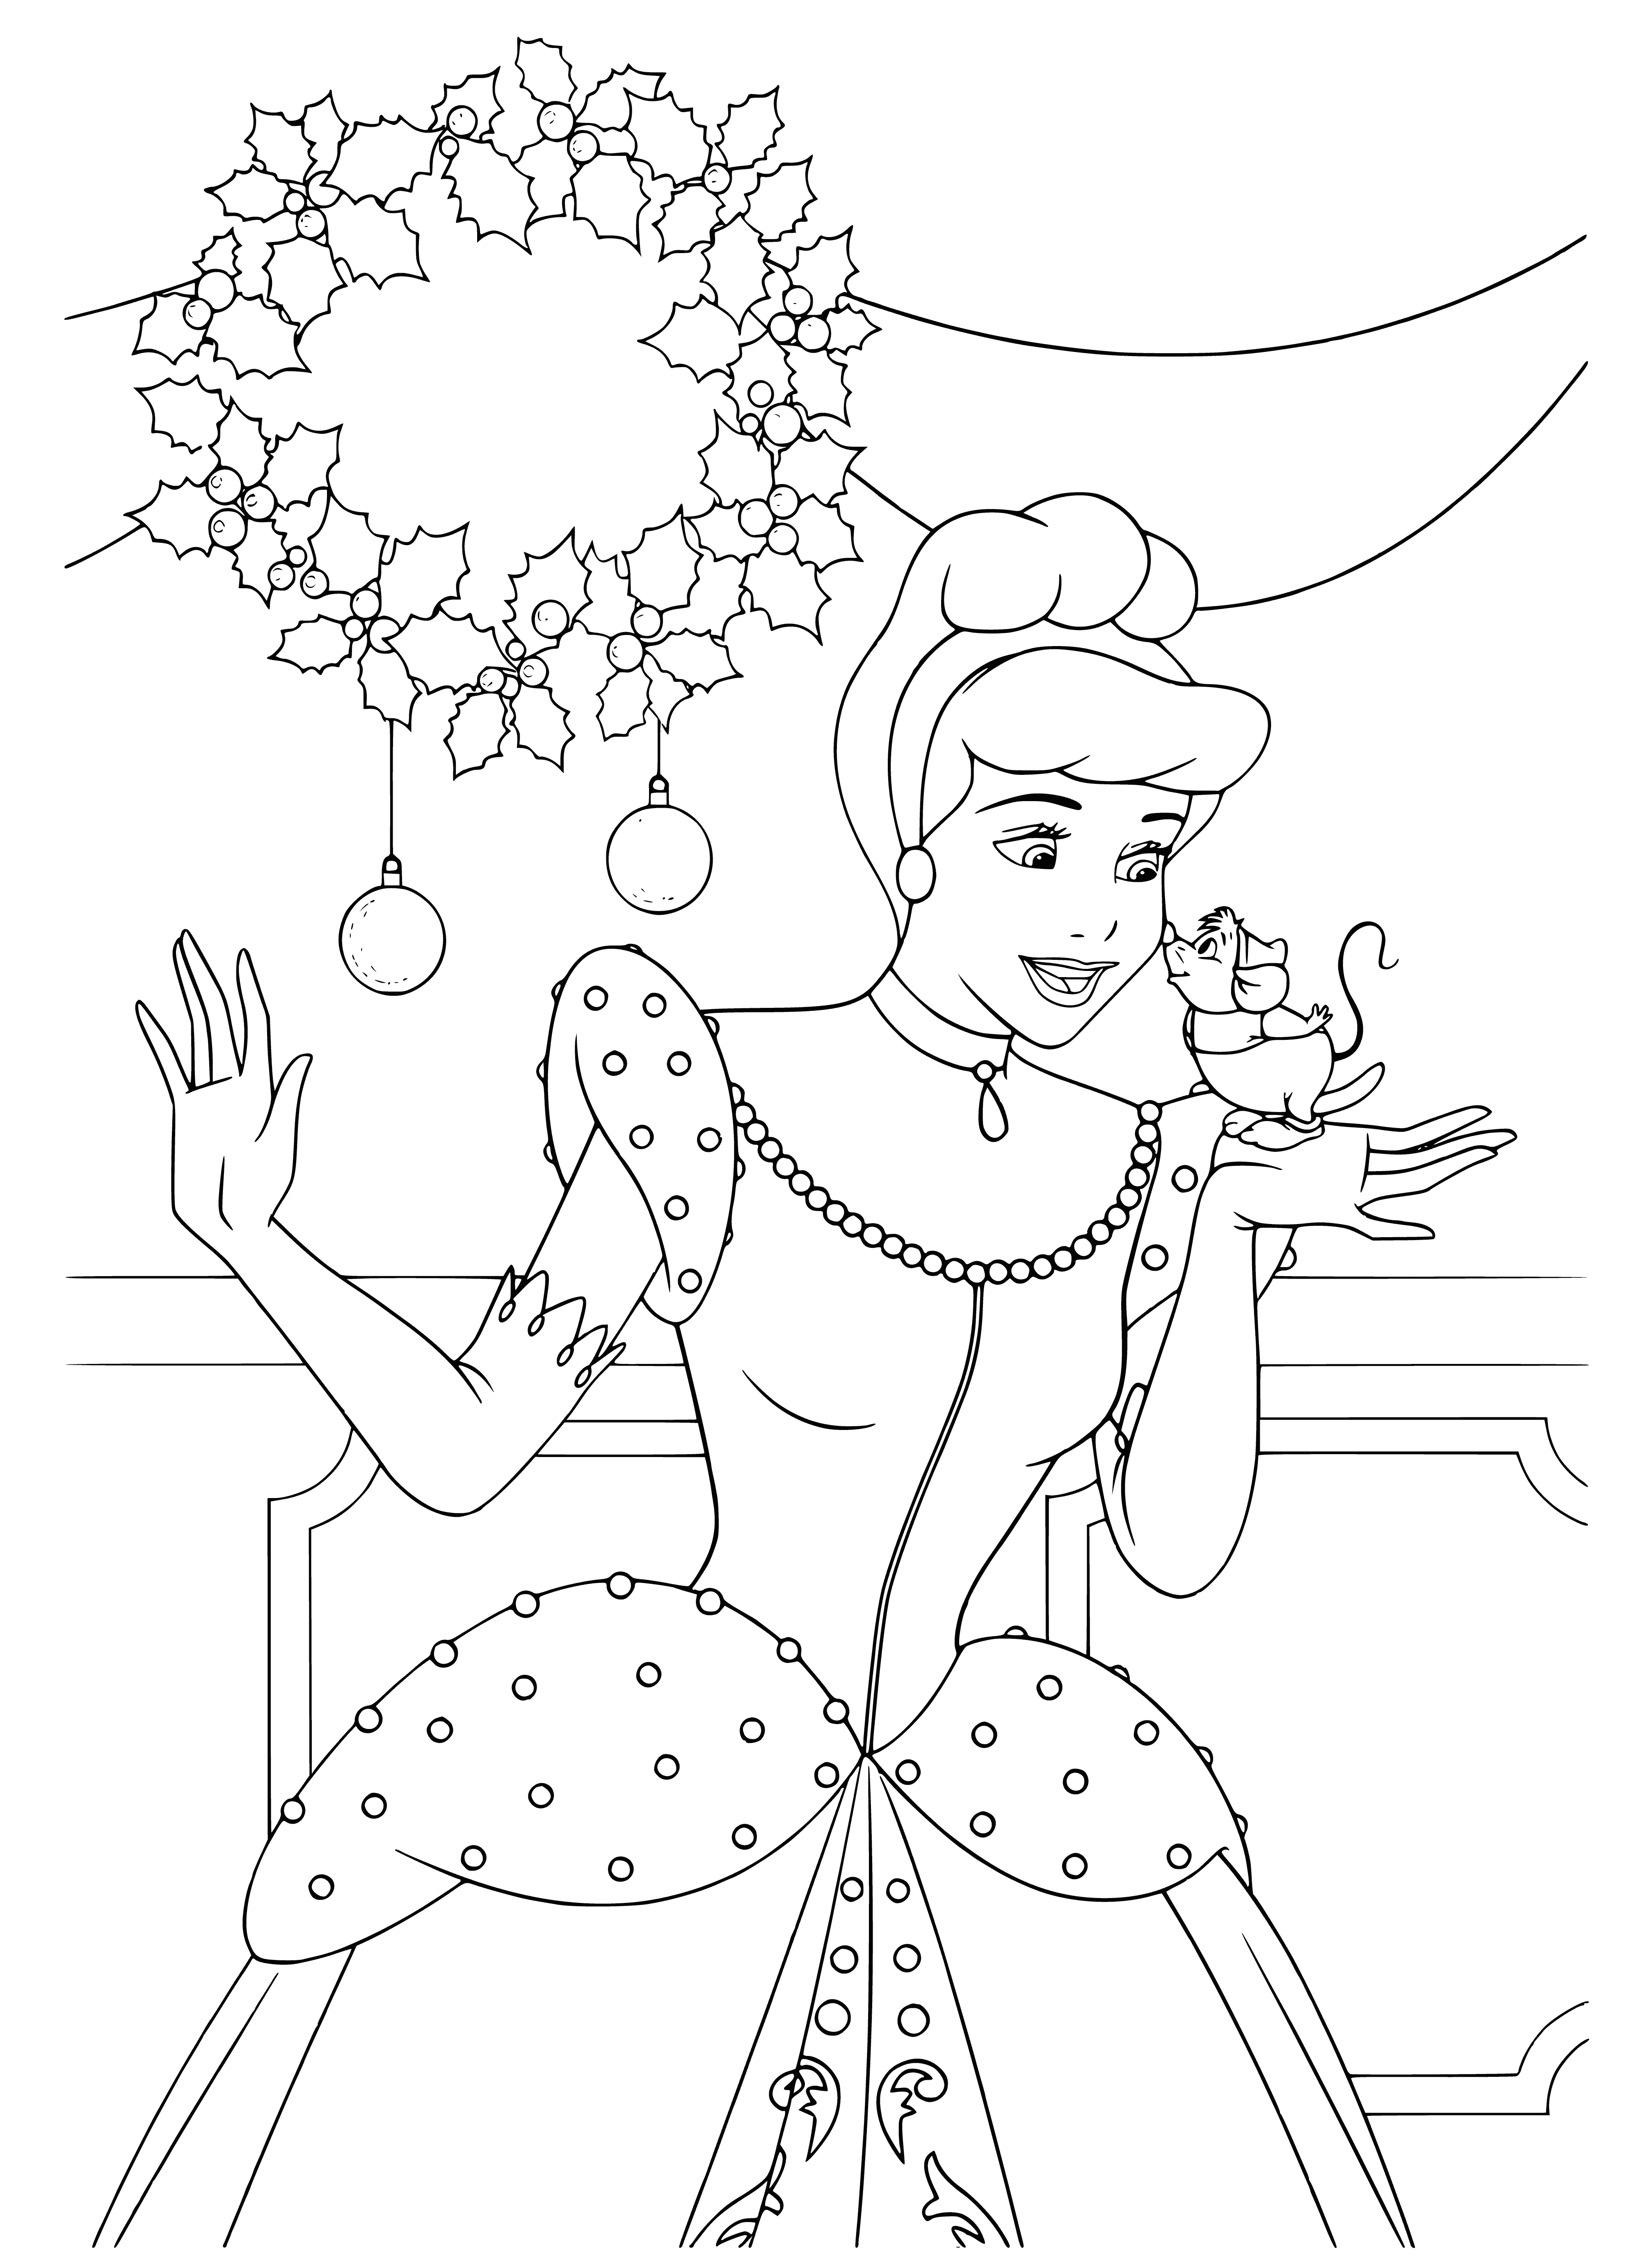 coloring page: Disney princesses toast the New Year together, dressed in their finest clothing. Cinderella in center, surrounded by Snow White, Sleeping Beauty, Belle, Jasmine & Ariel.